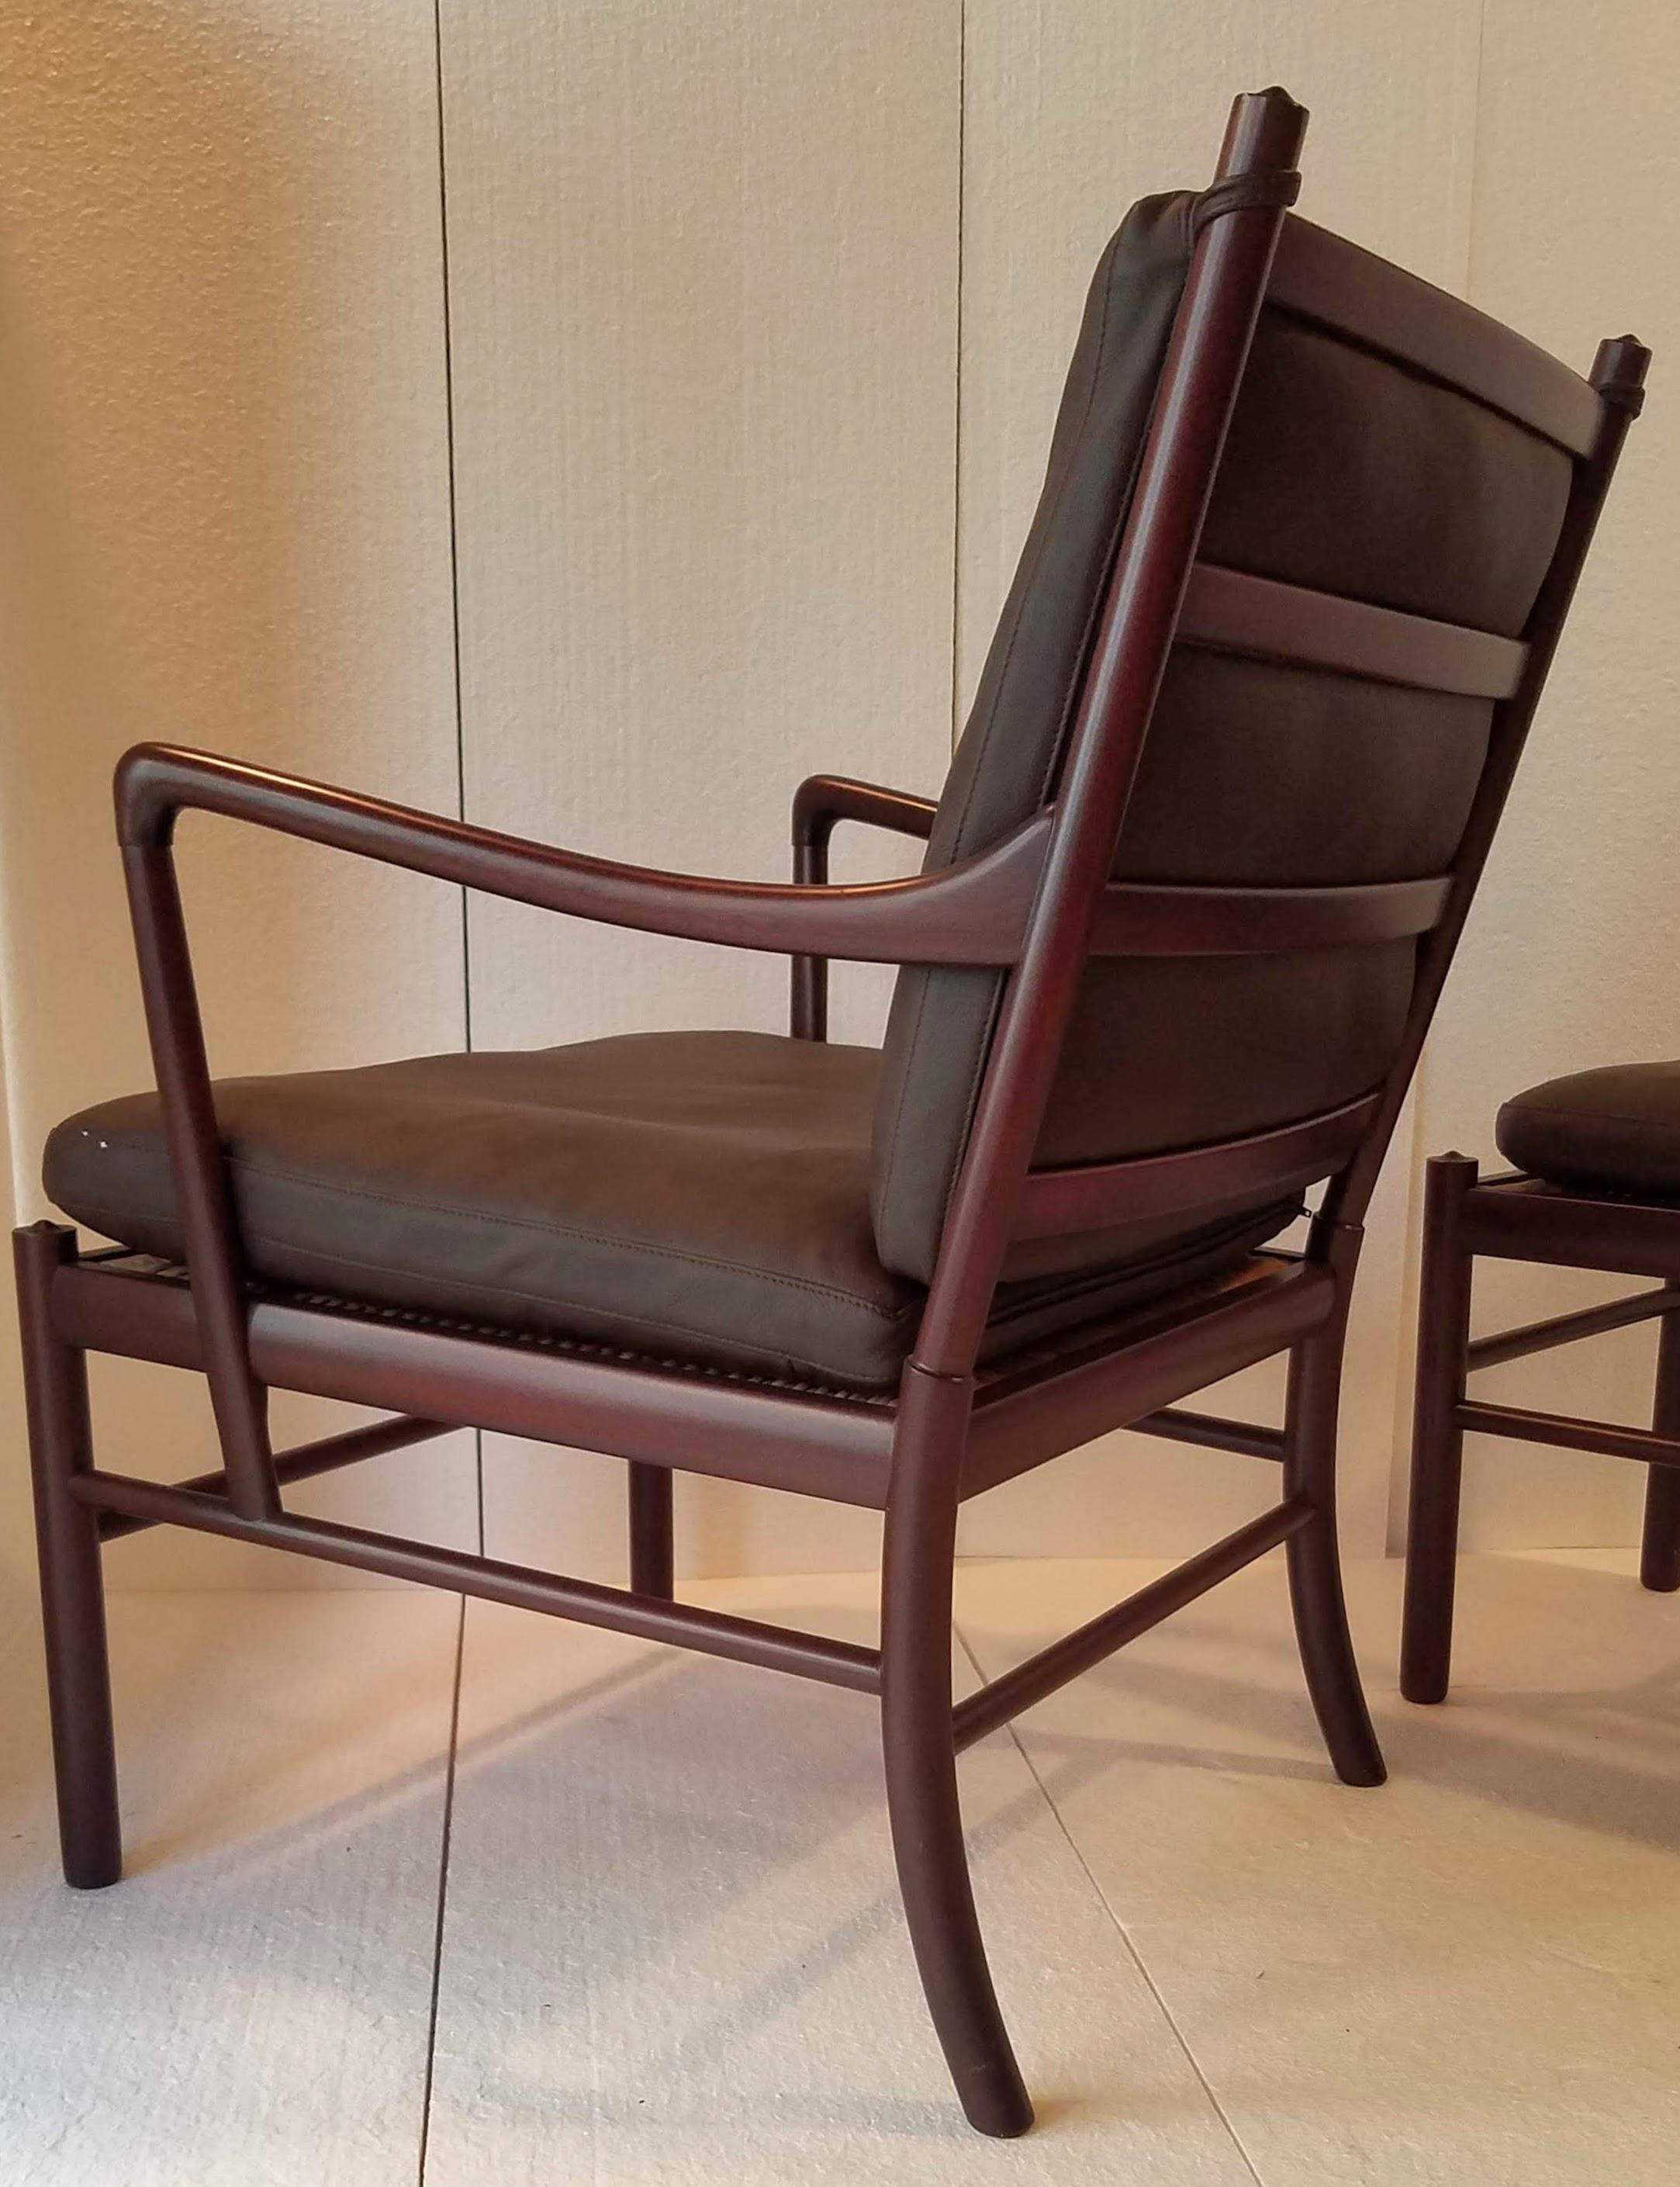 Caning Ole Wanscher Rosewood Colonial Chair and Ottoman C. 1960 Poul Jeppsen Denmark